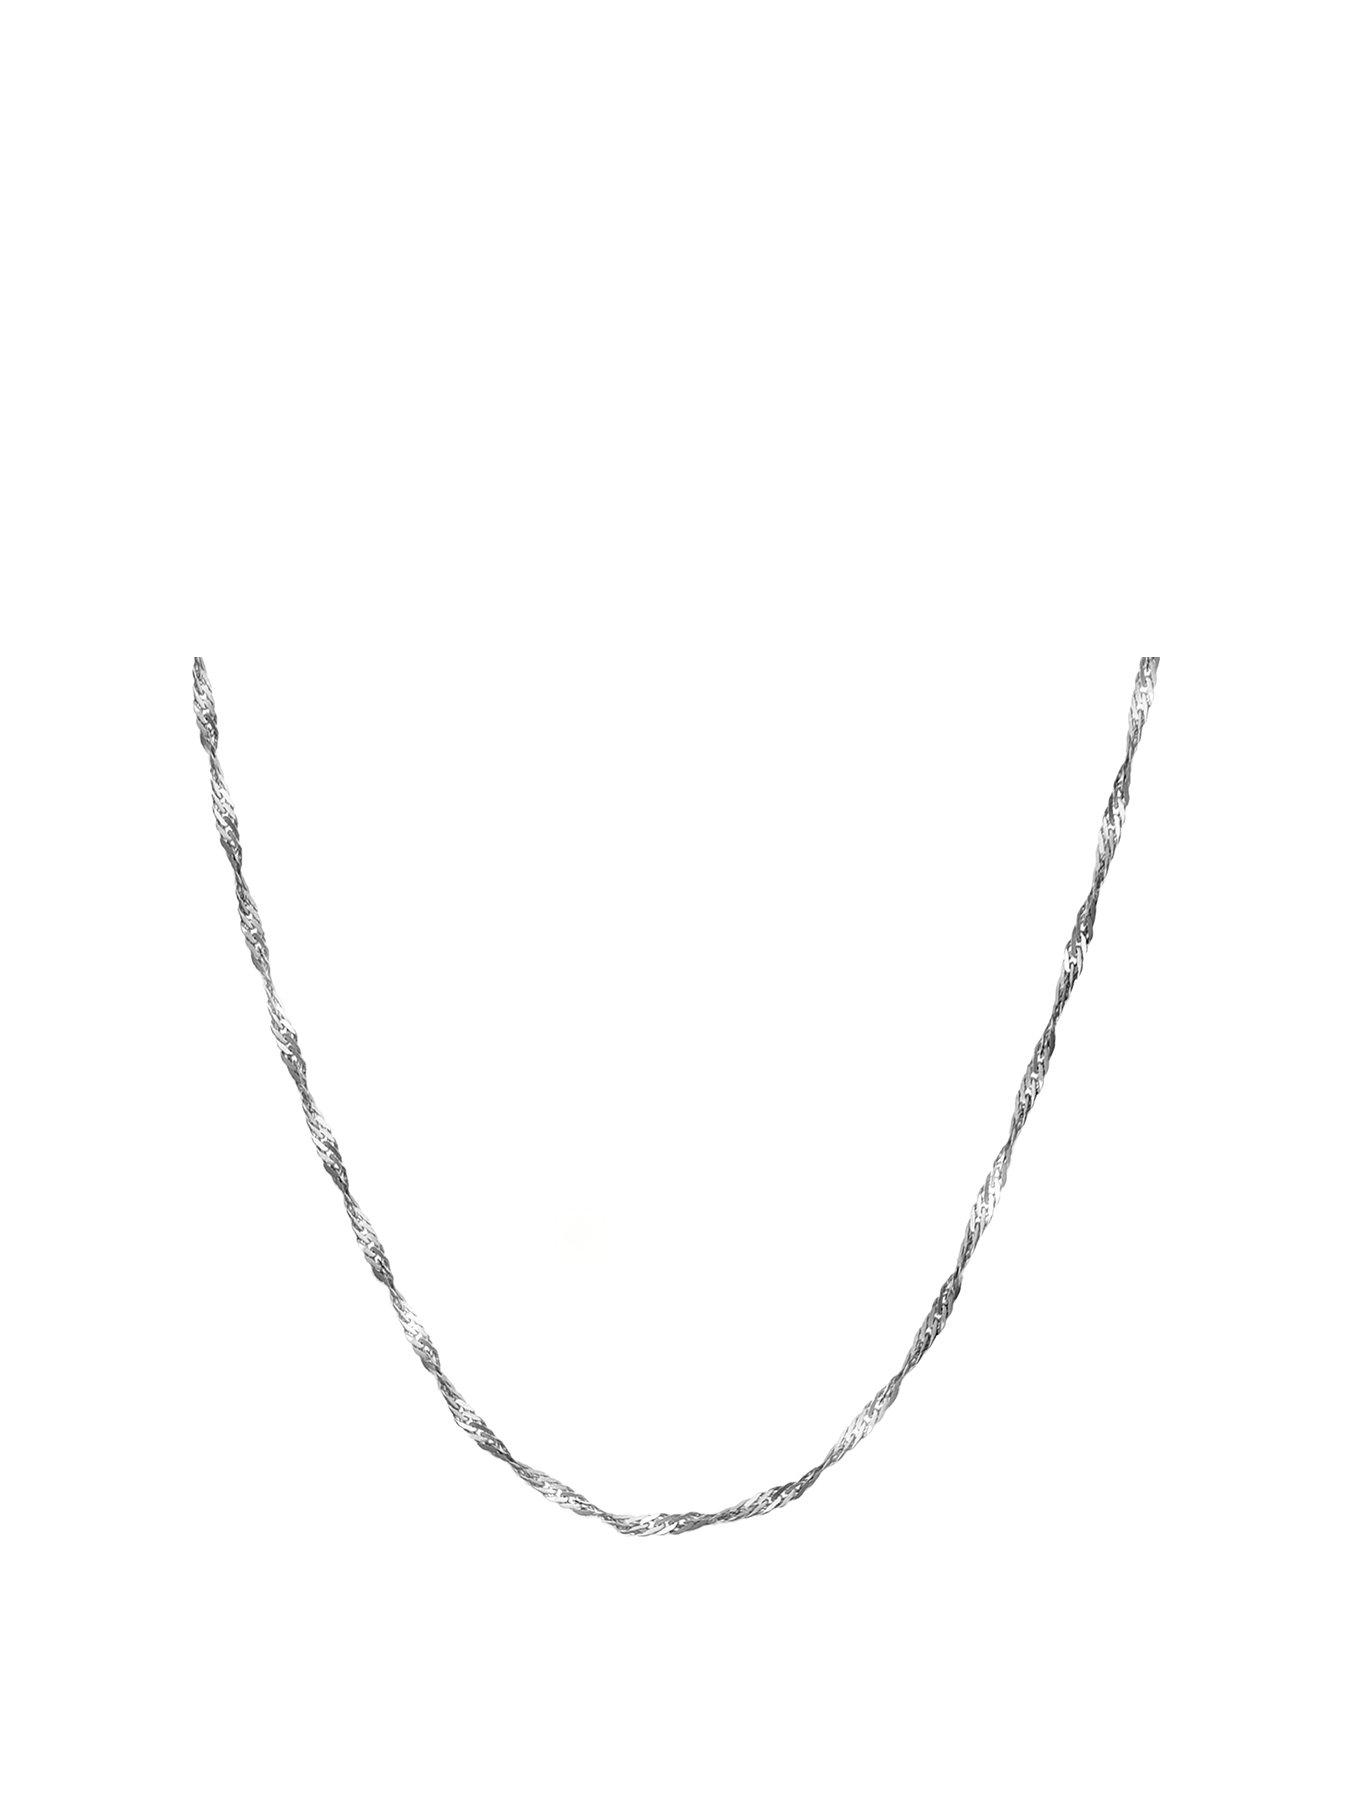 Jewellery & watches Sterling Silver Disco Twist Diamond Cut Adjustable Necklace